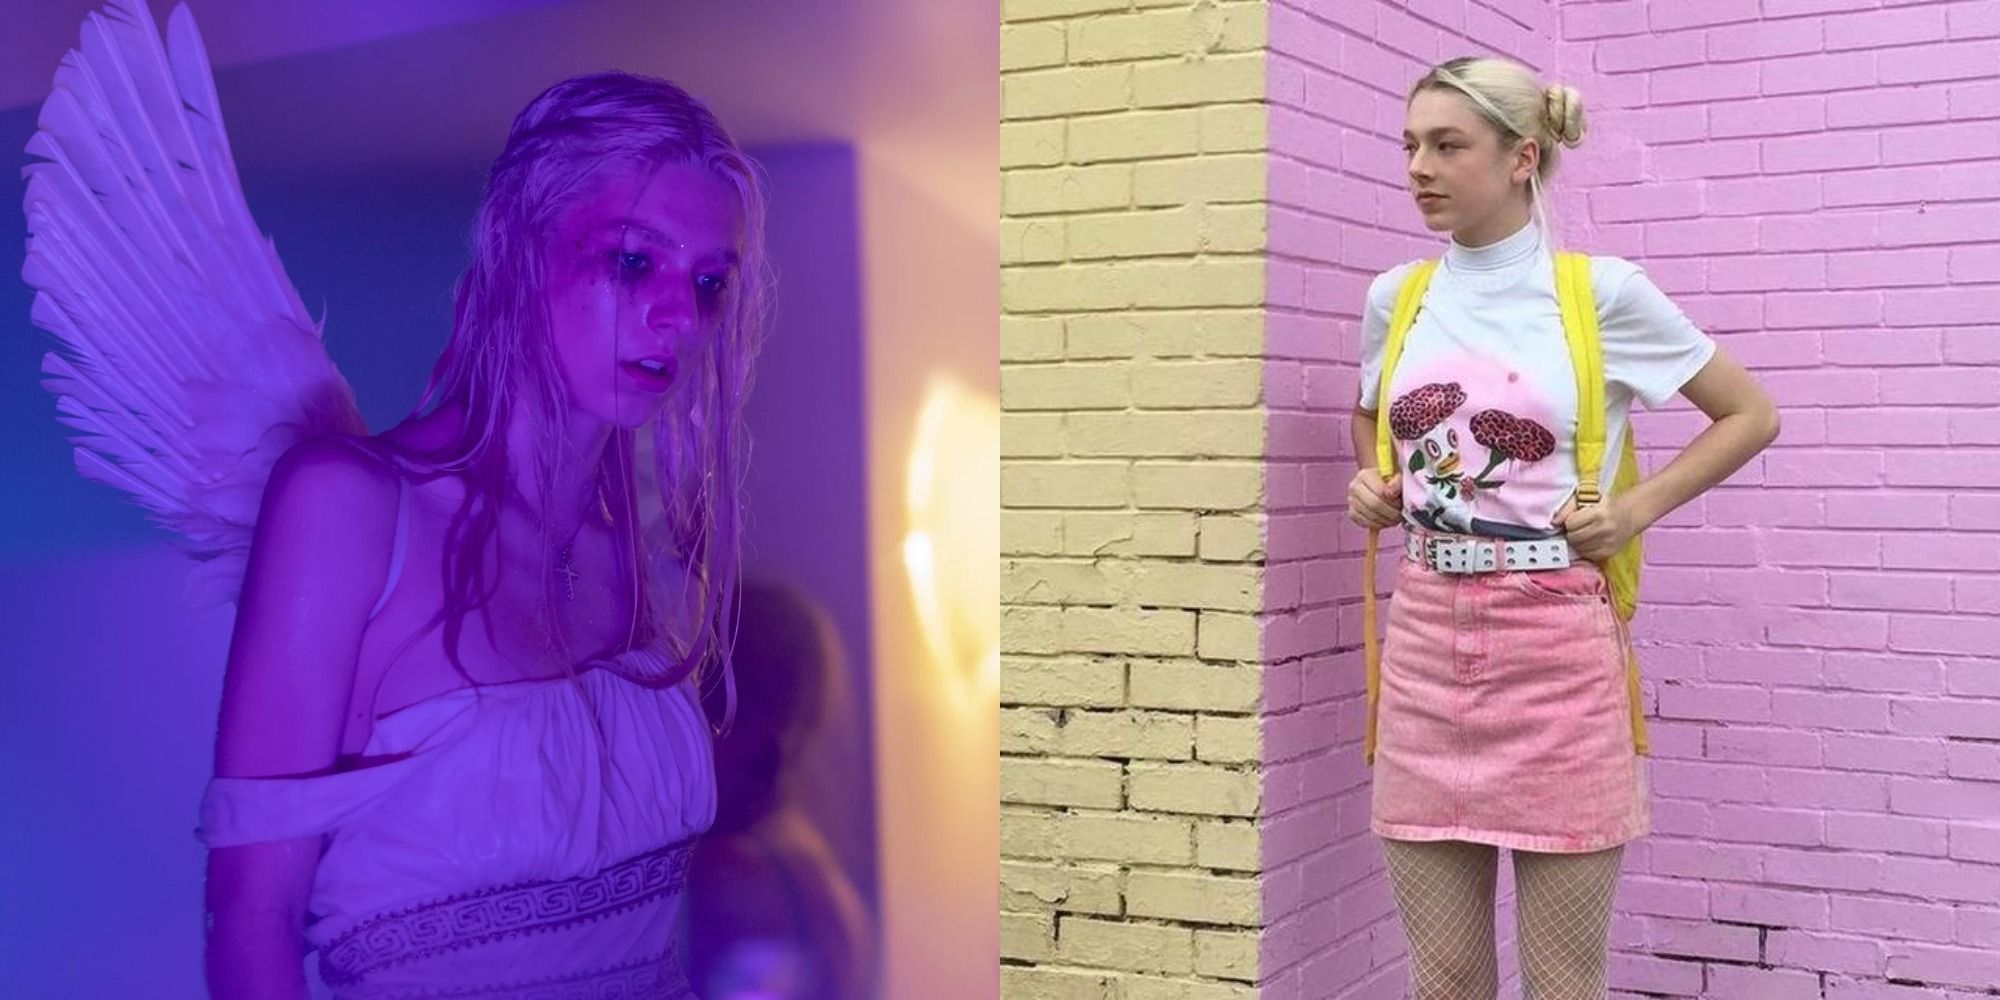 Split image showing Jules' outfits in Euphoria